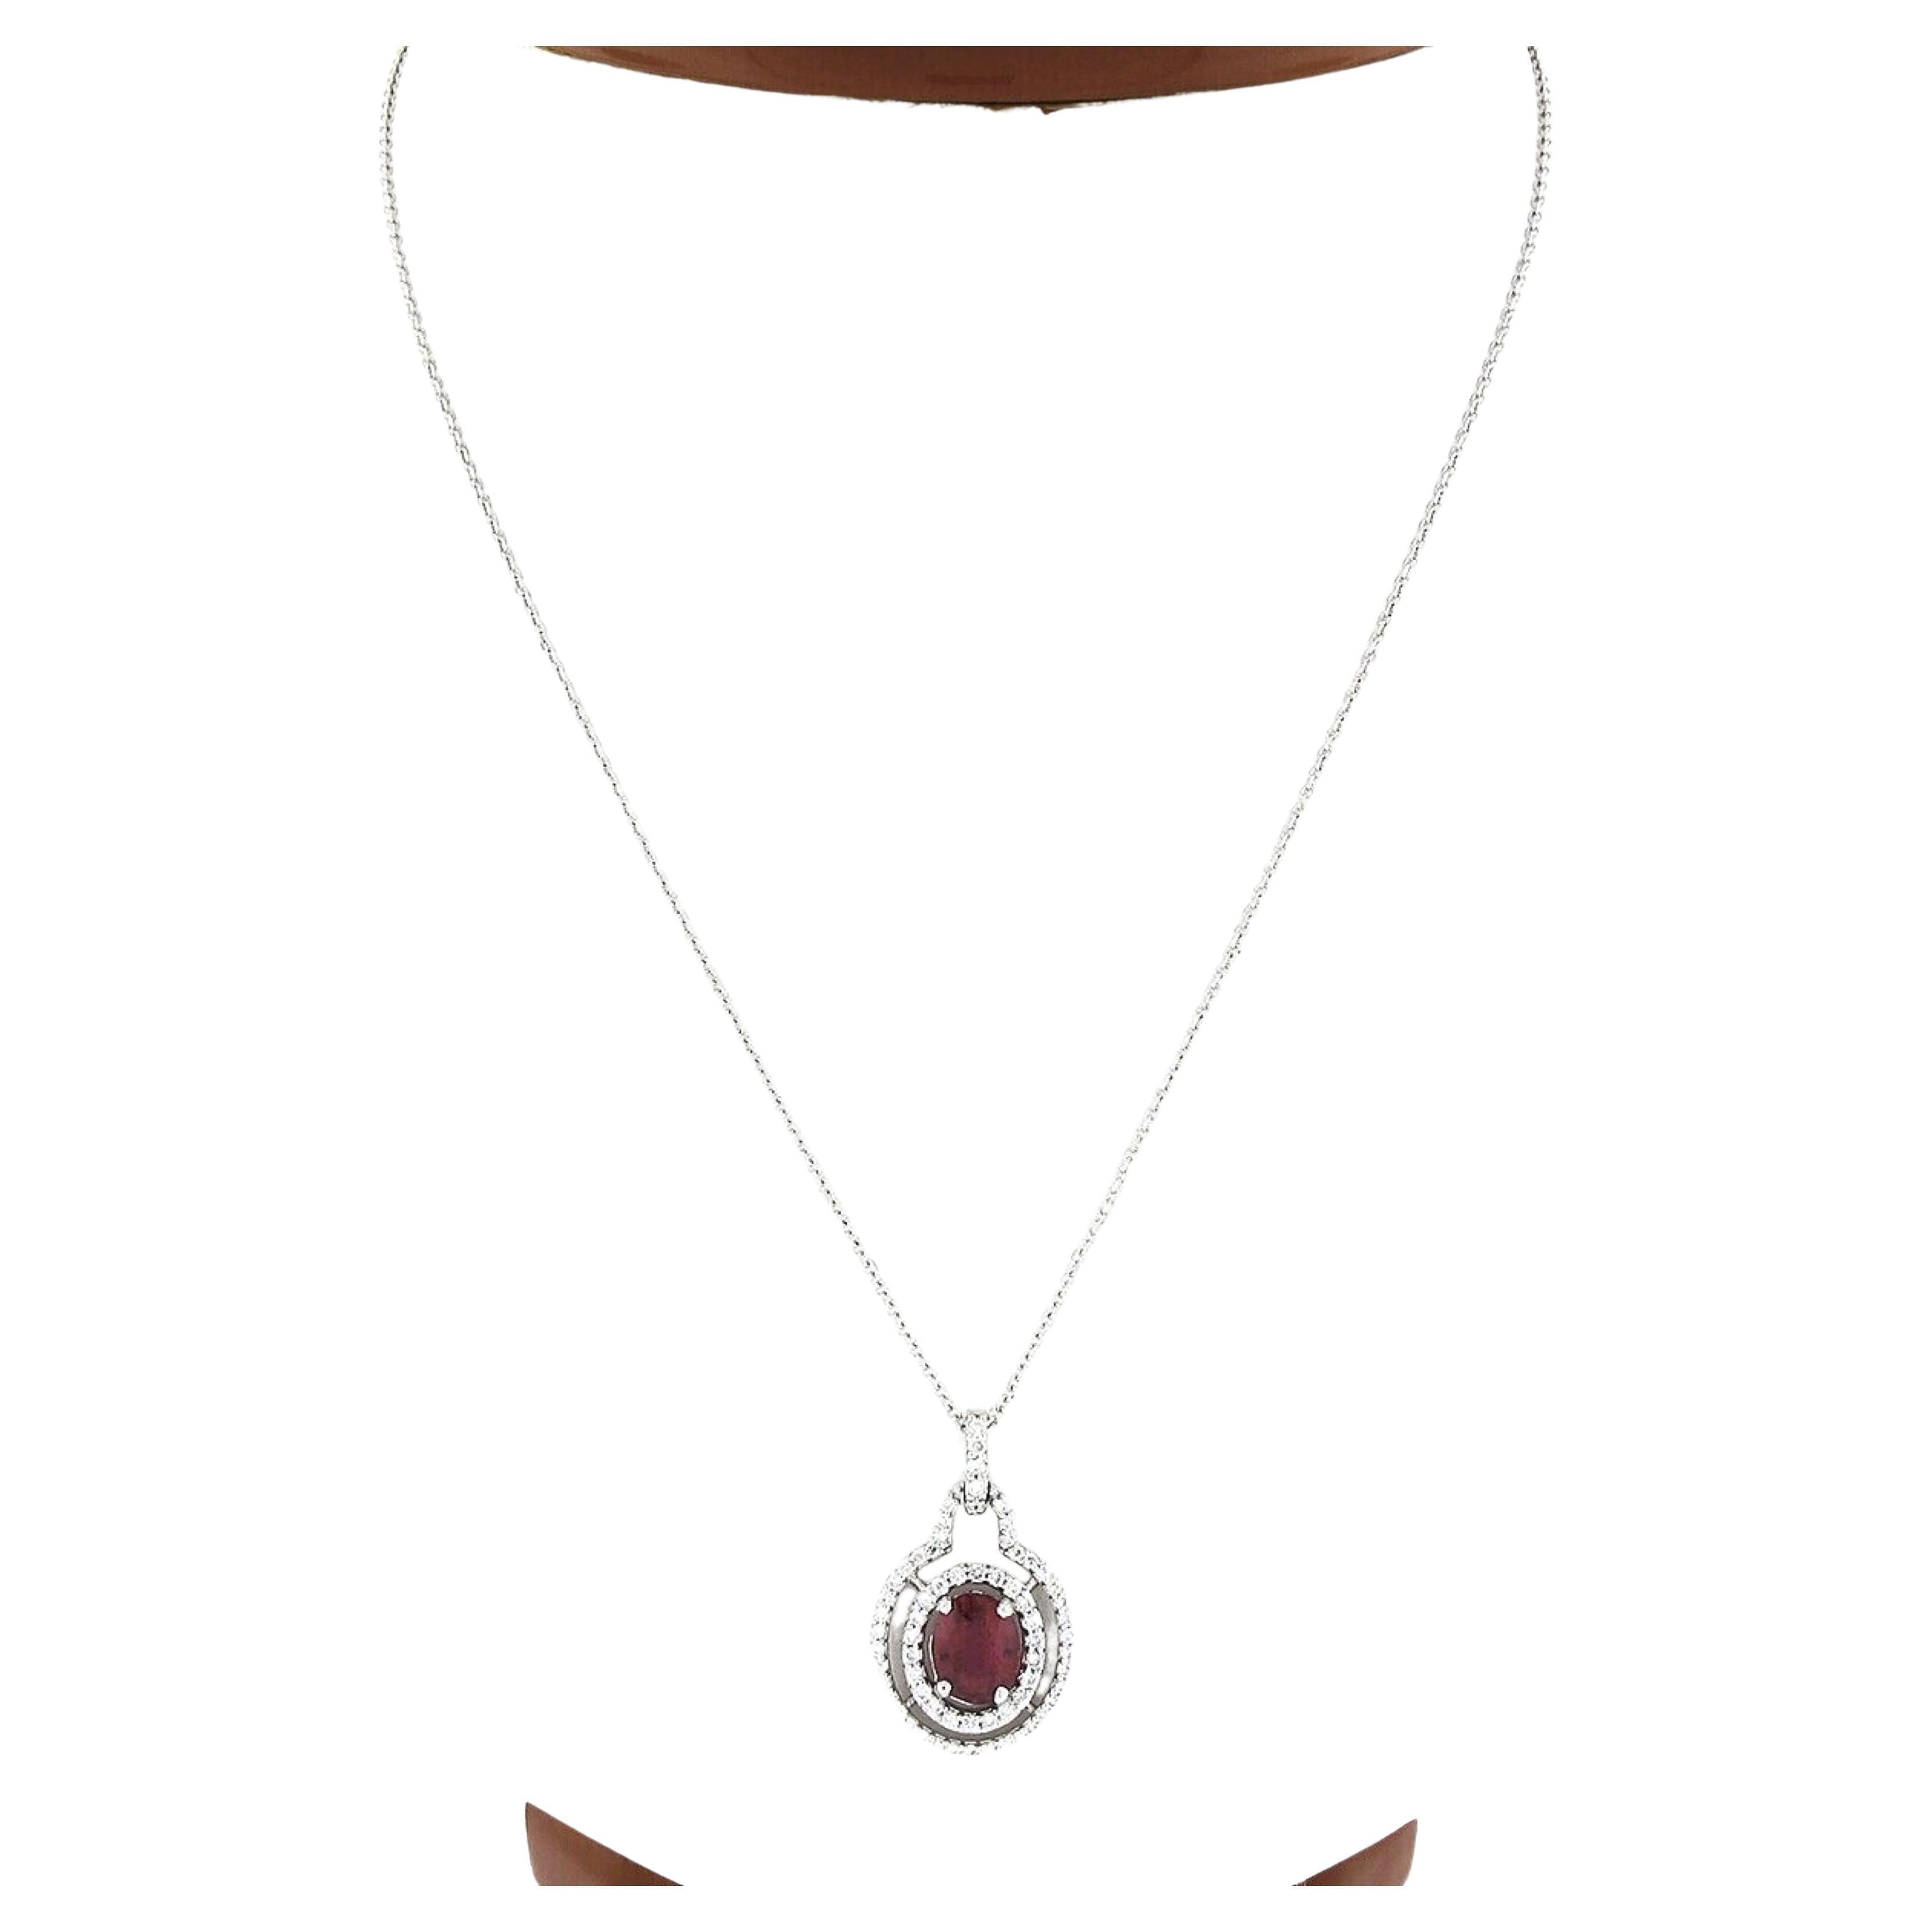 Here we have a gorgeous pendant necklace newly crafted in solid 14k white gold featuring a very fine quality, GIA certified, oval brilliant cut Spinel solitaire neatly set at the center of a fiery diamond double halo. The Spinel is remarkably